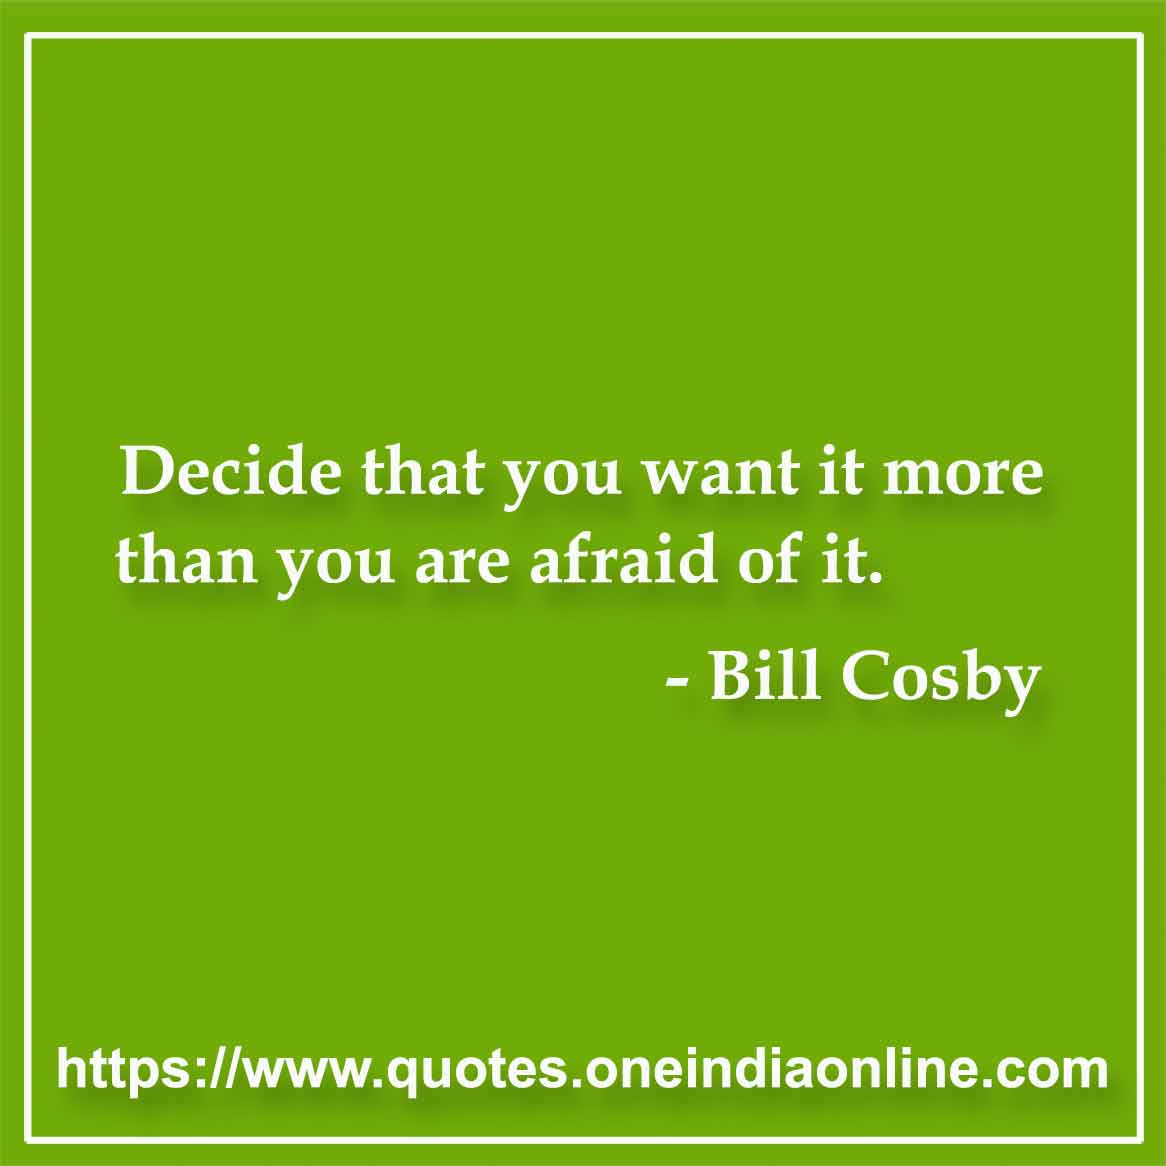 Decide that you want it more than you are afraid of it.